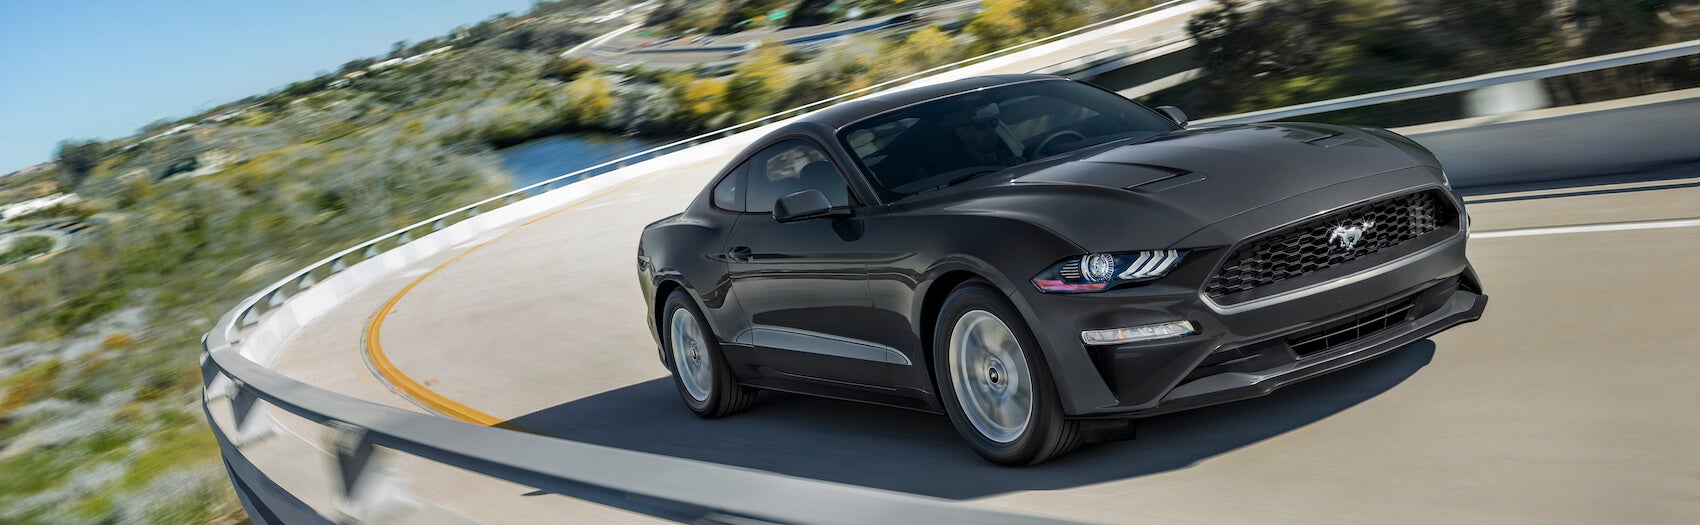 2020 Ford Mustang dimensions Plainfield, IN